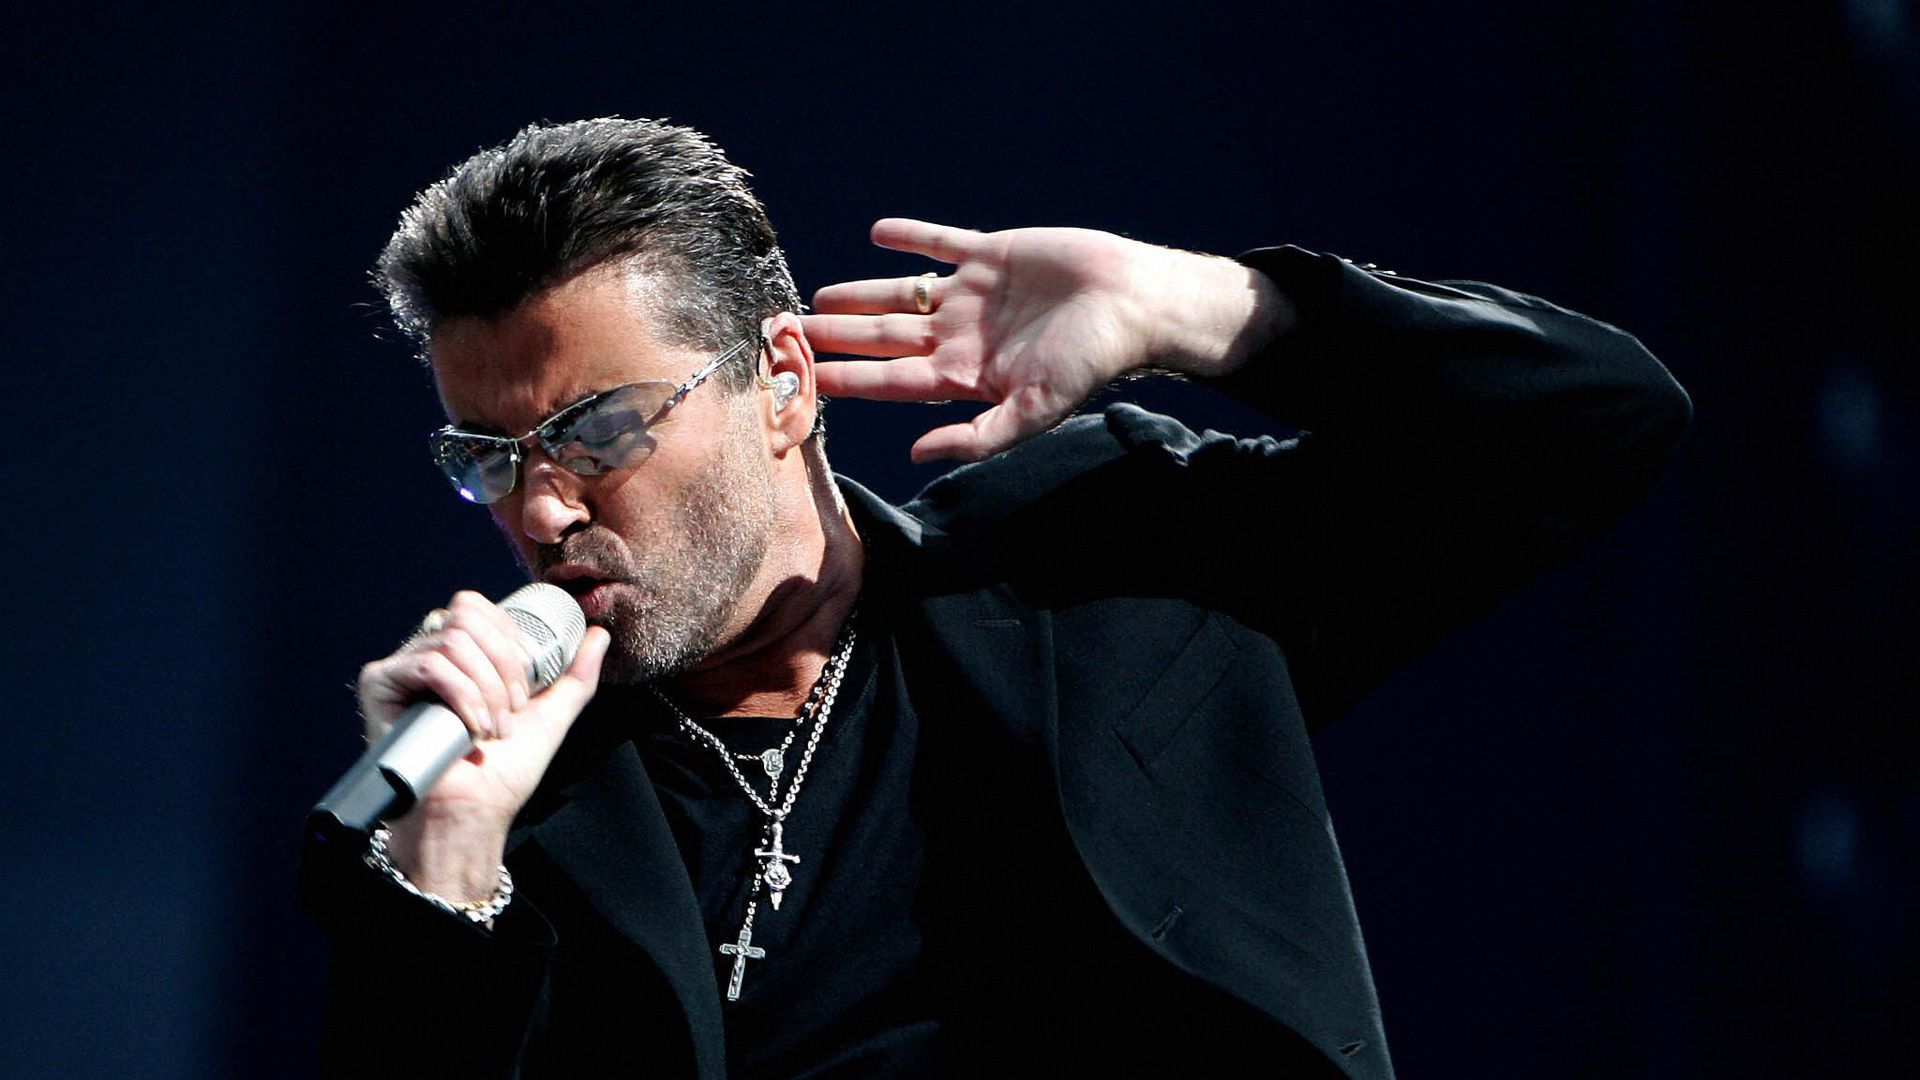 Late musician George Micheal sings into a mircrophone with his other hand near his ear. 